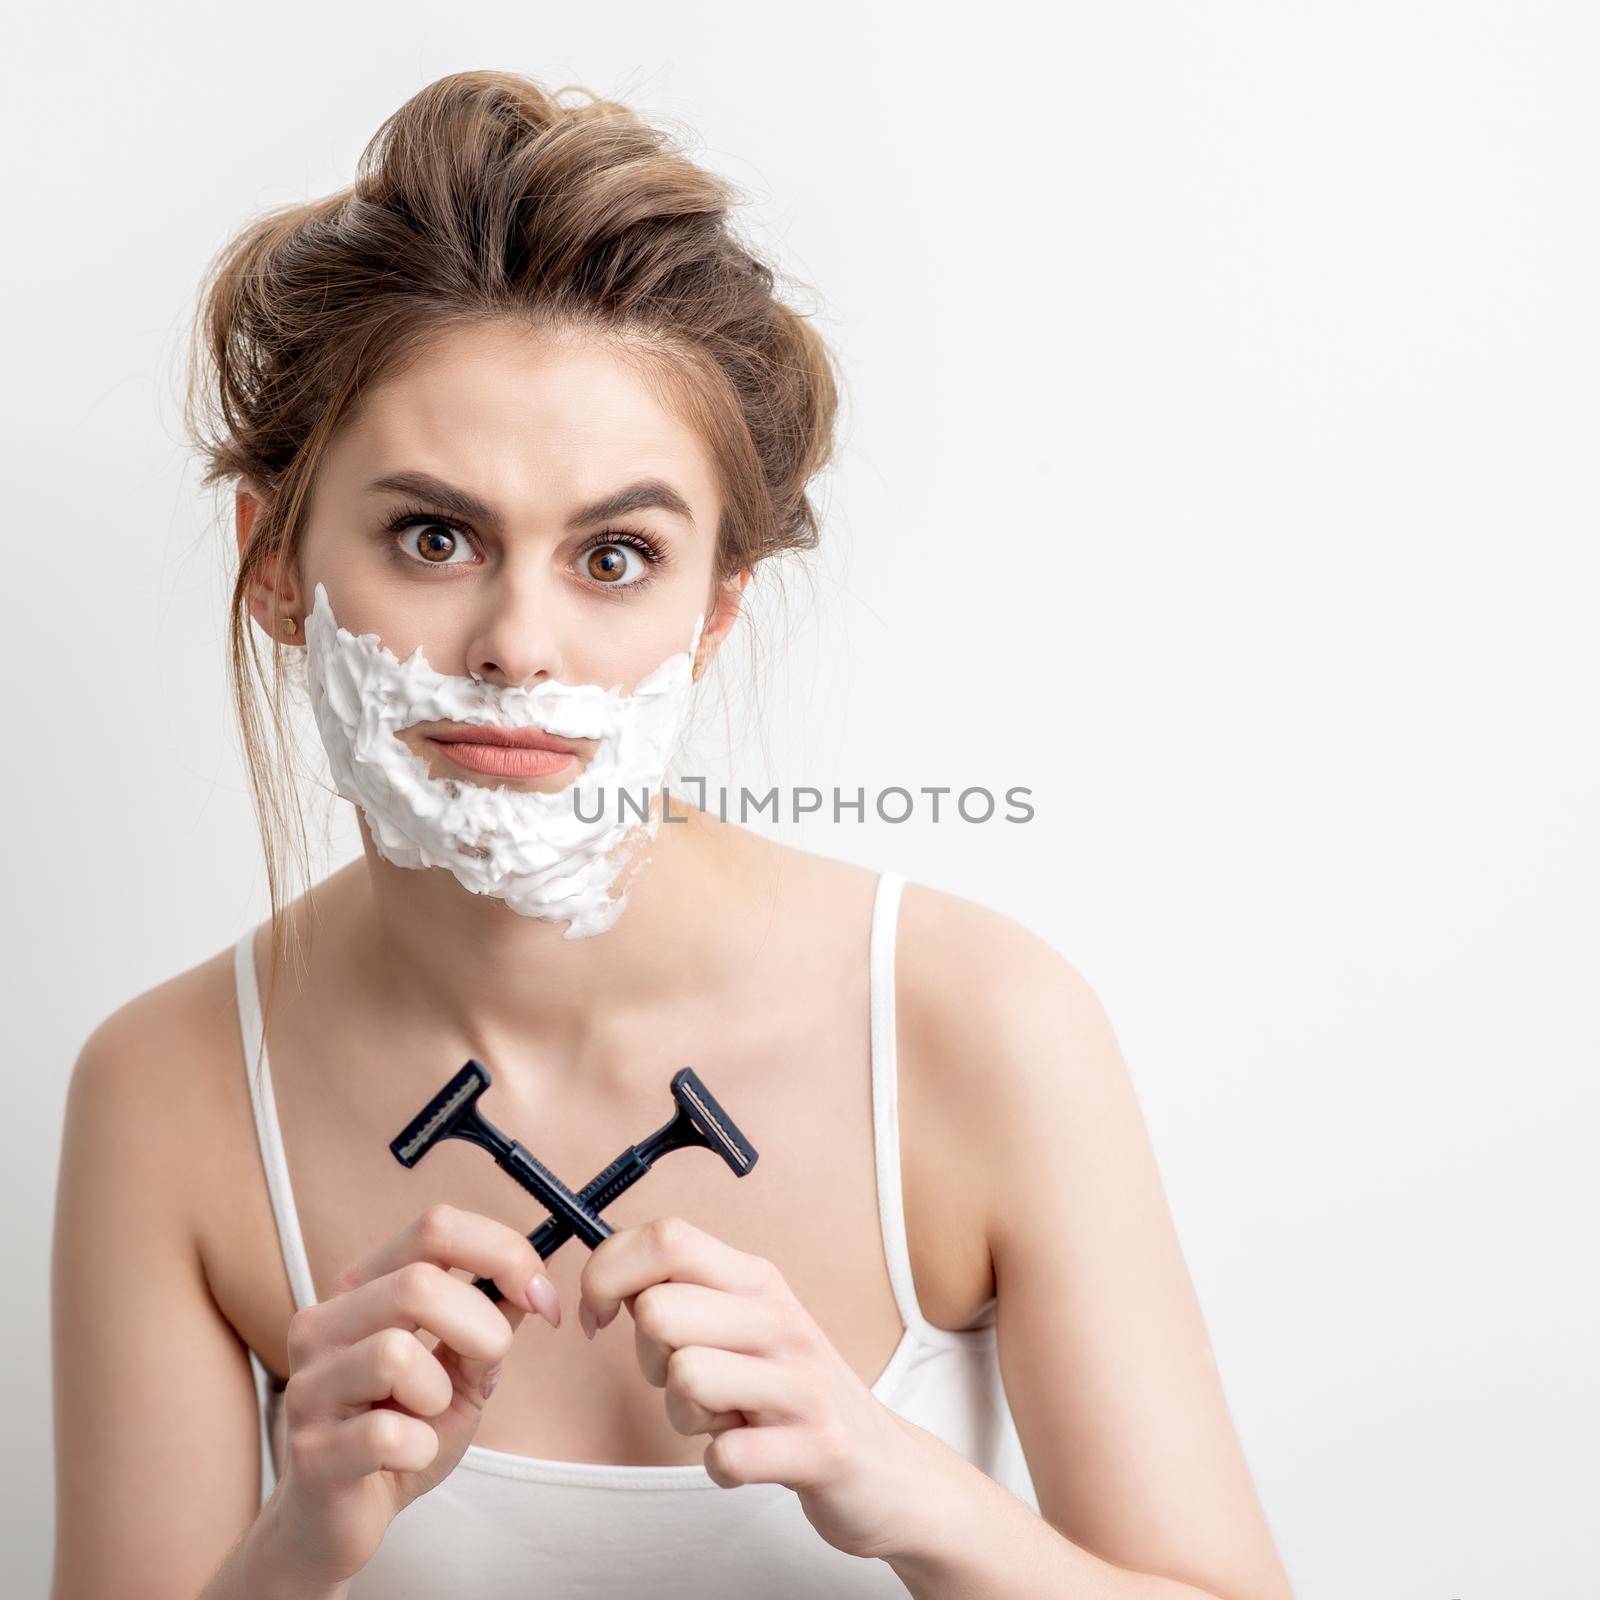 Beautiful young caucasian woman with shaving foam on her face and two razors in her hands on white background